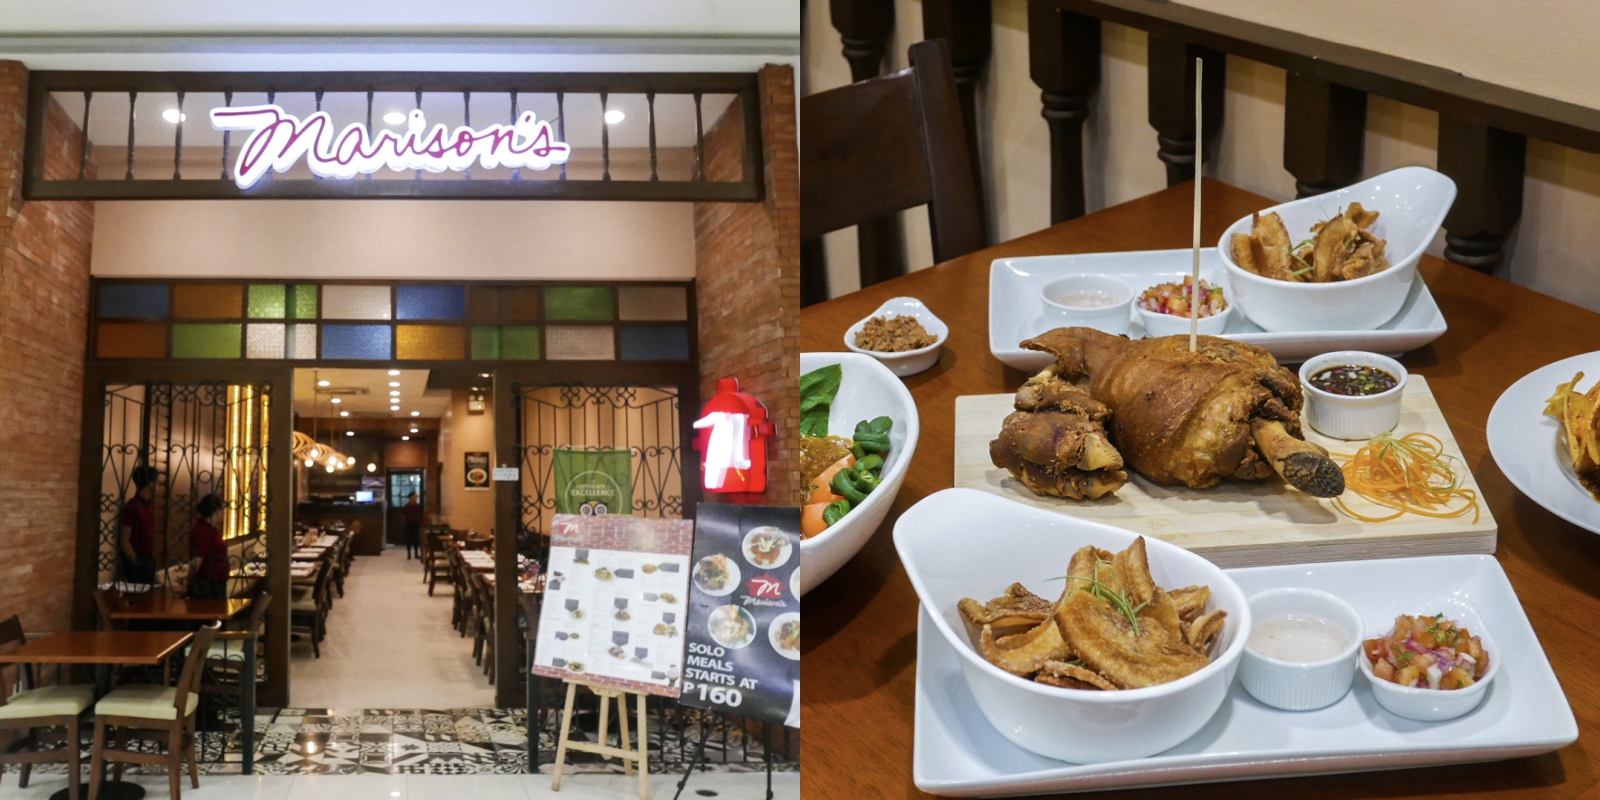 Get Classic Filipino Home-Style Meals at Marison’s